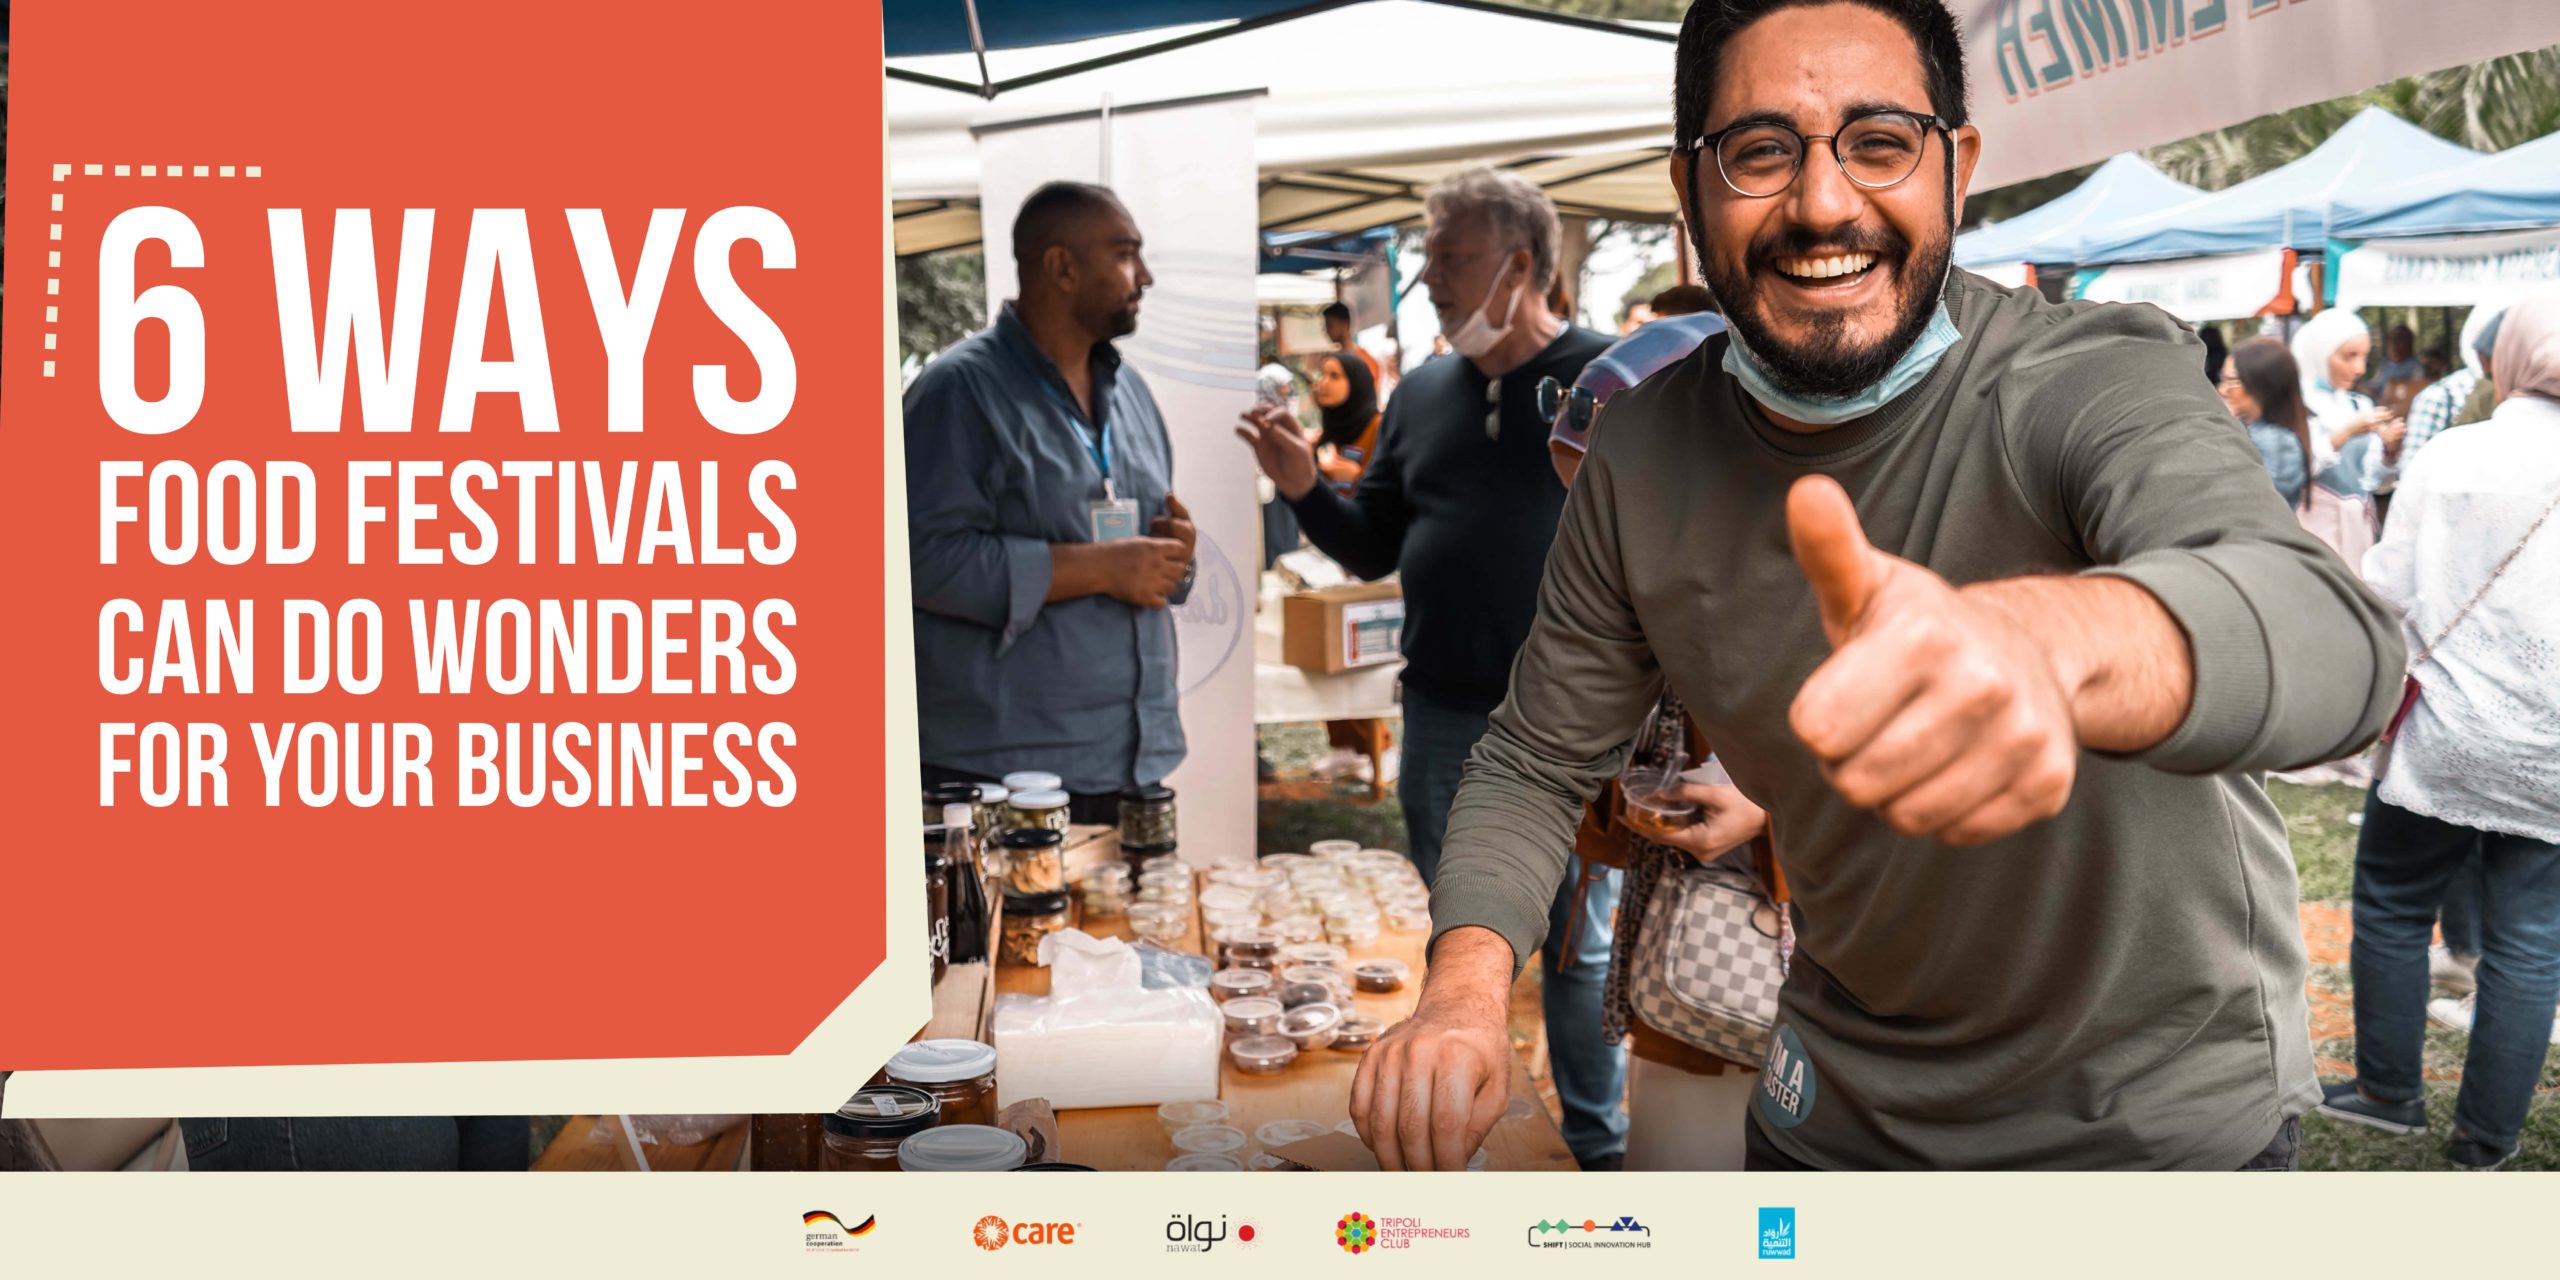 Gourmet Market: 6 ways food festivals can do wonders for your business